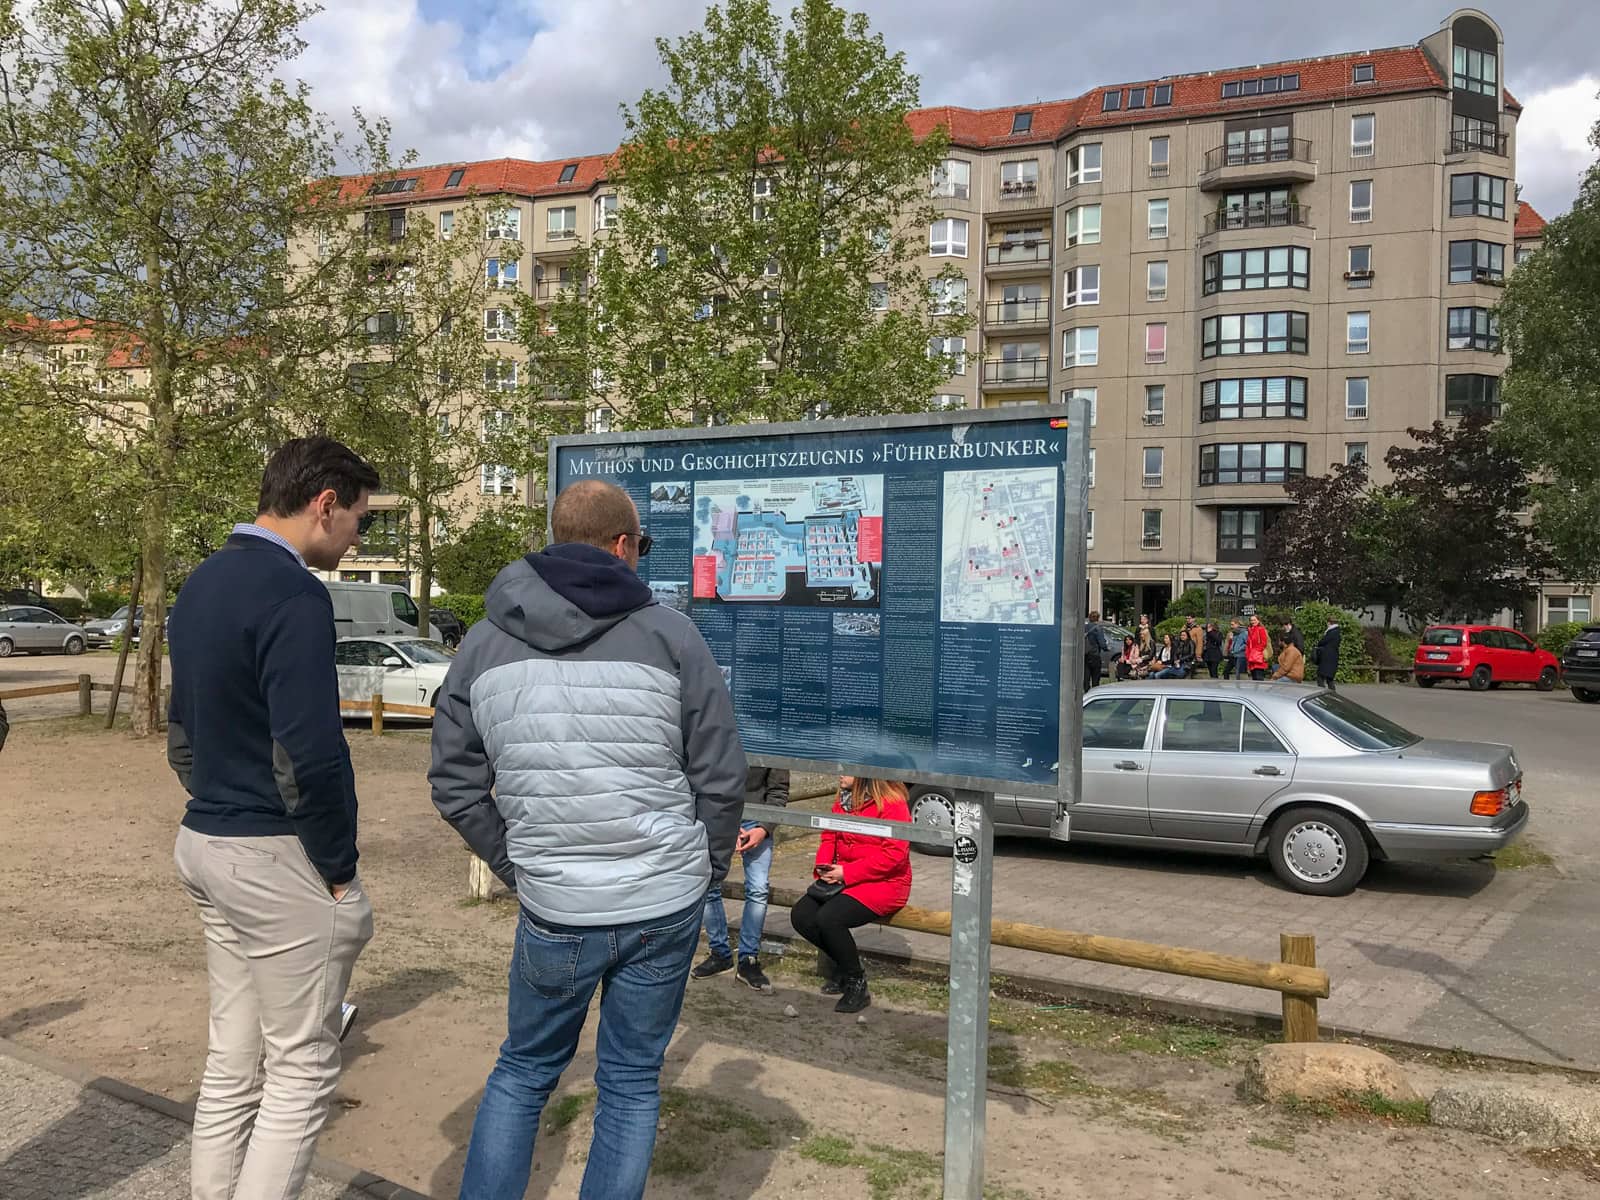 Two men standing by a sign in front of an open carpark. The men are reading the sign, which has detailed information about Hitler’s bunker